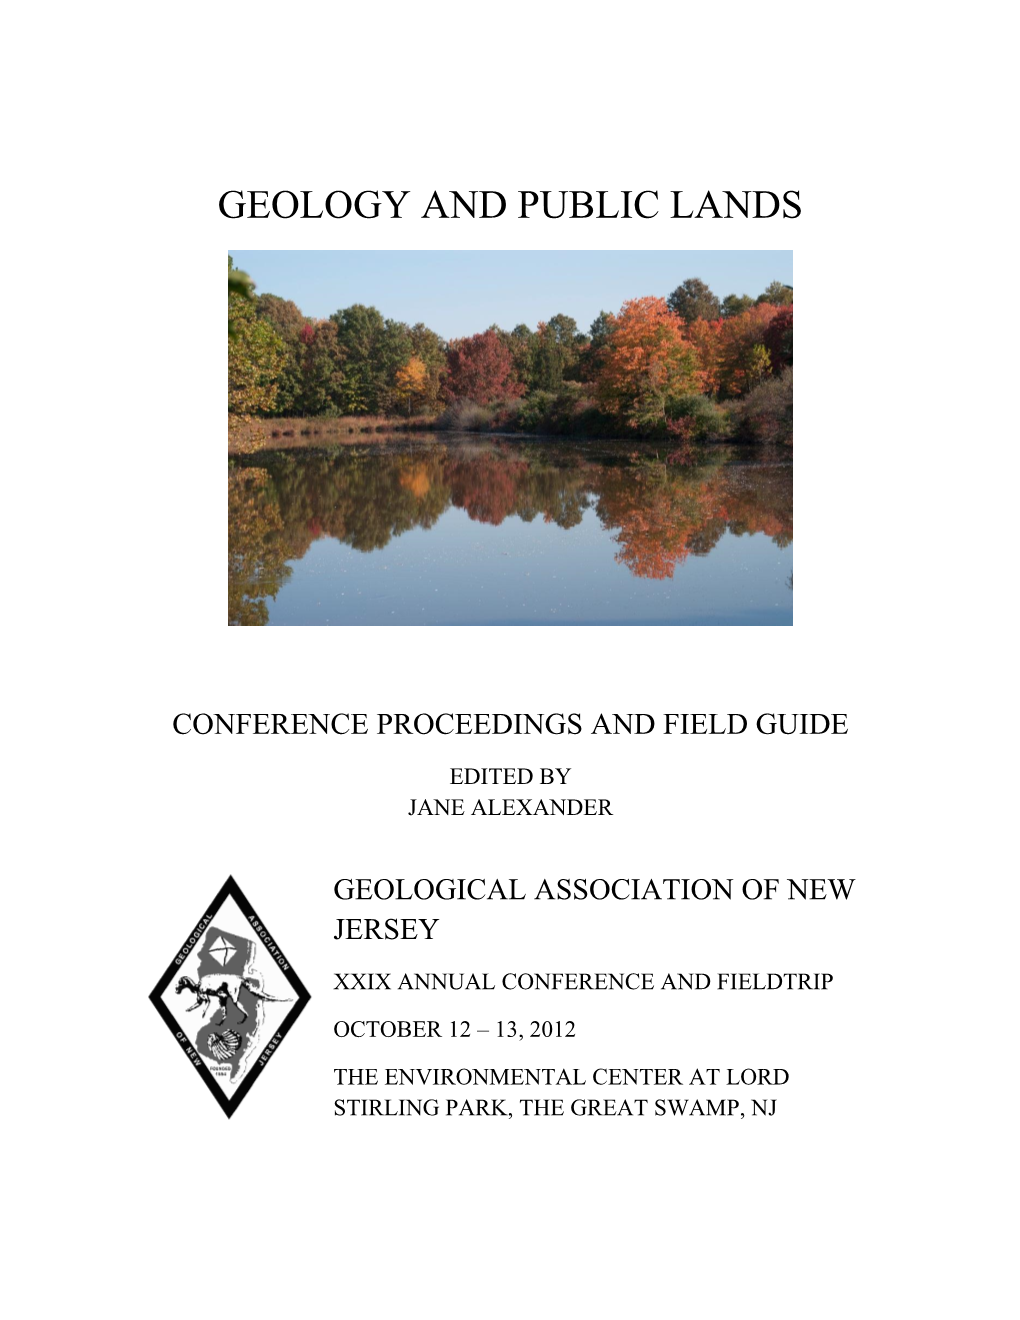 Geology and Public Lands